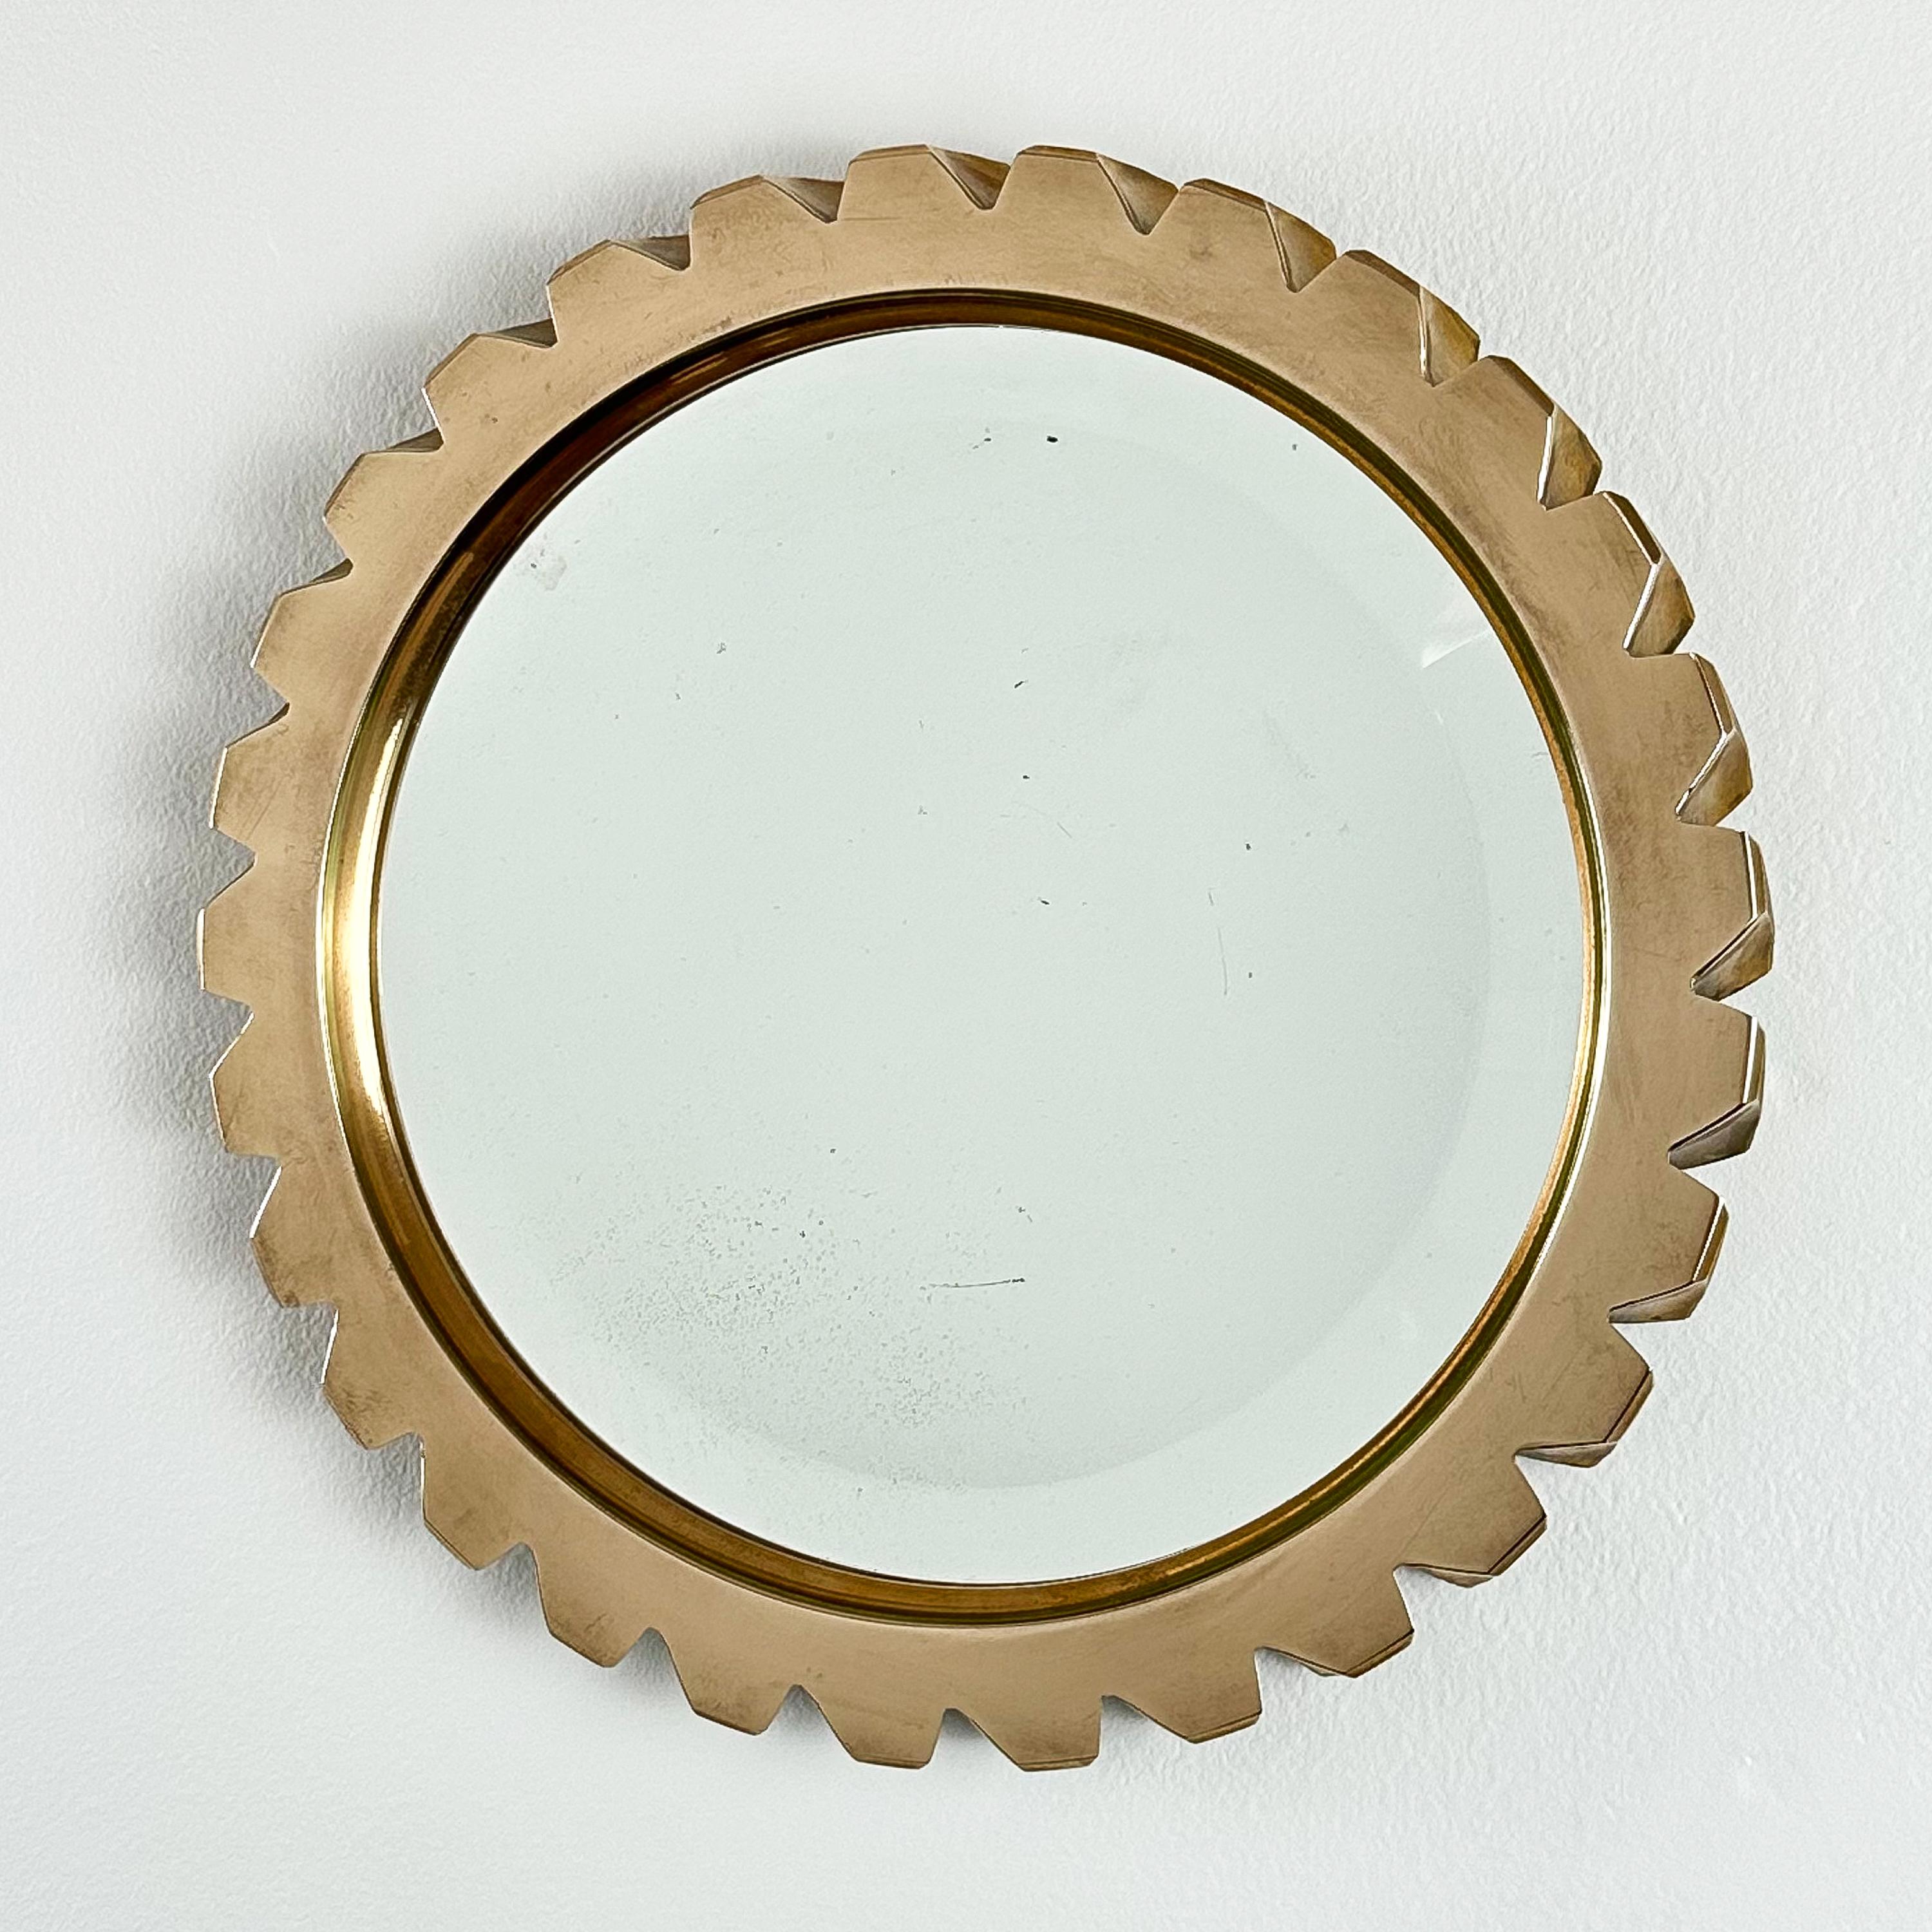 A French solid bronze round wall mirror, circa 1970s. Modern Industrial form resembling a gear.  Polished solid bronze surrounds a 8.25” diameter beveled mirror. Bevel is 5/8”.  Bronze is in excellent condition.  Minor age spots to the mirror. 